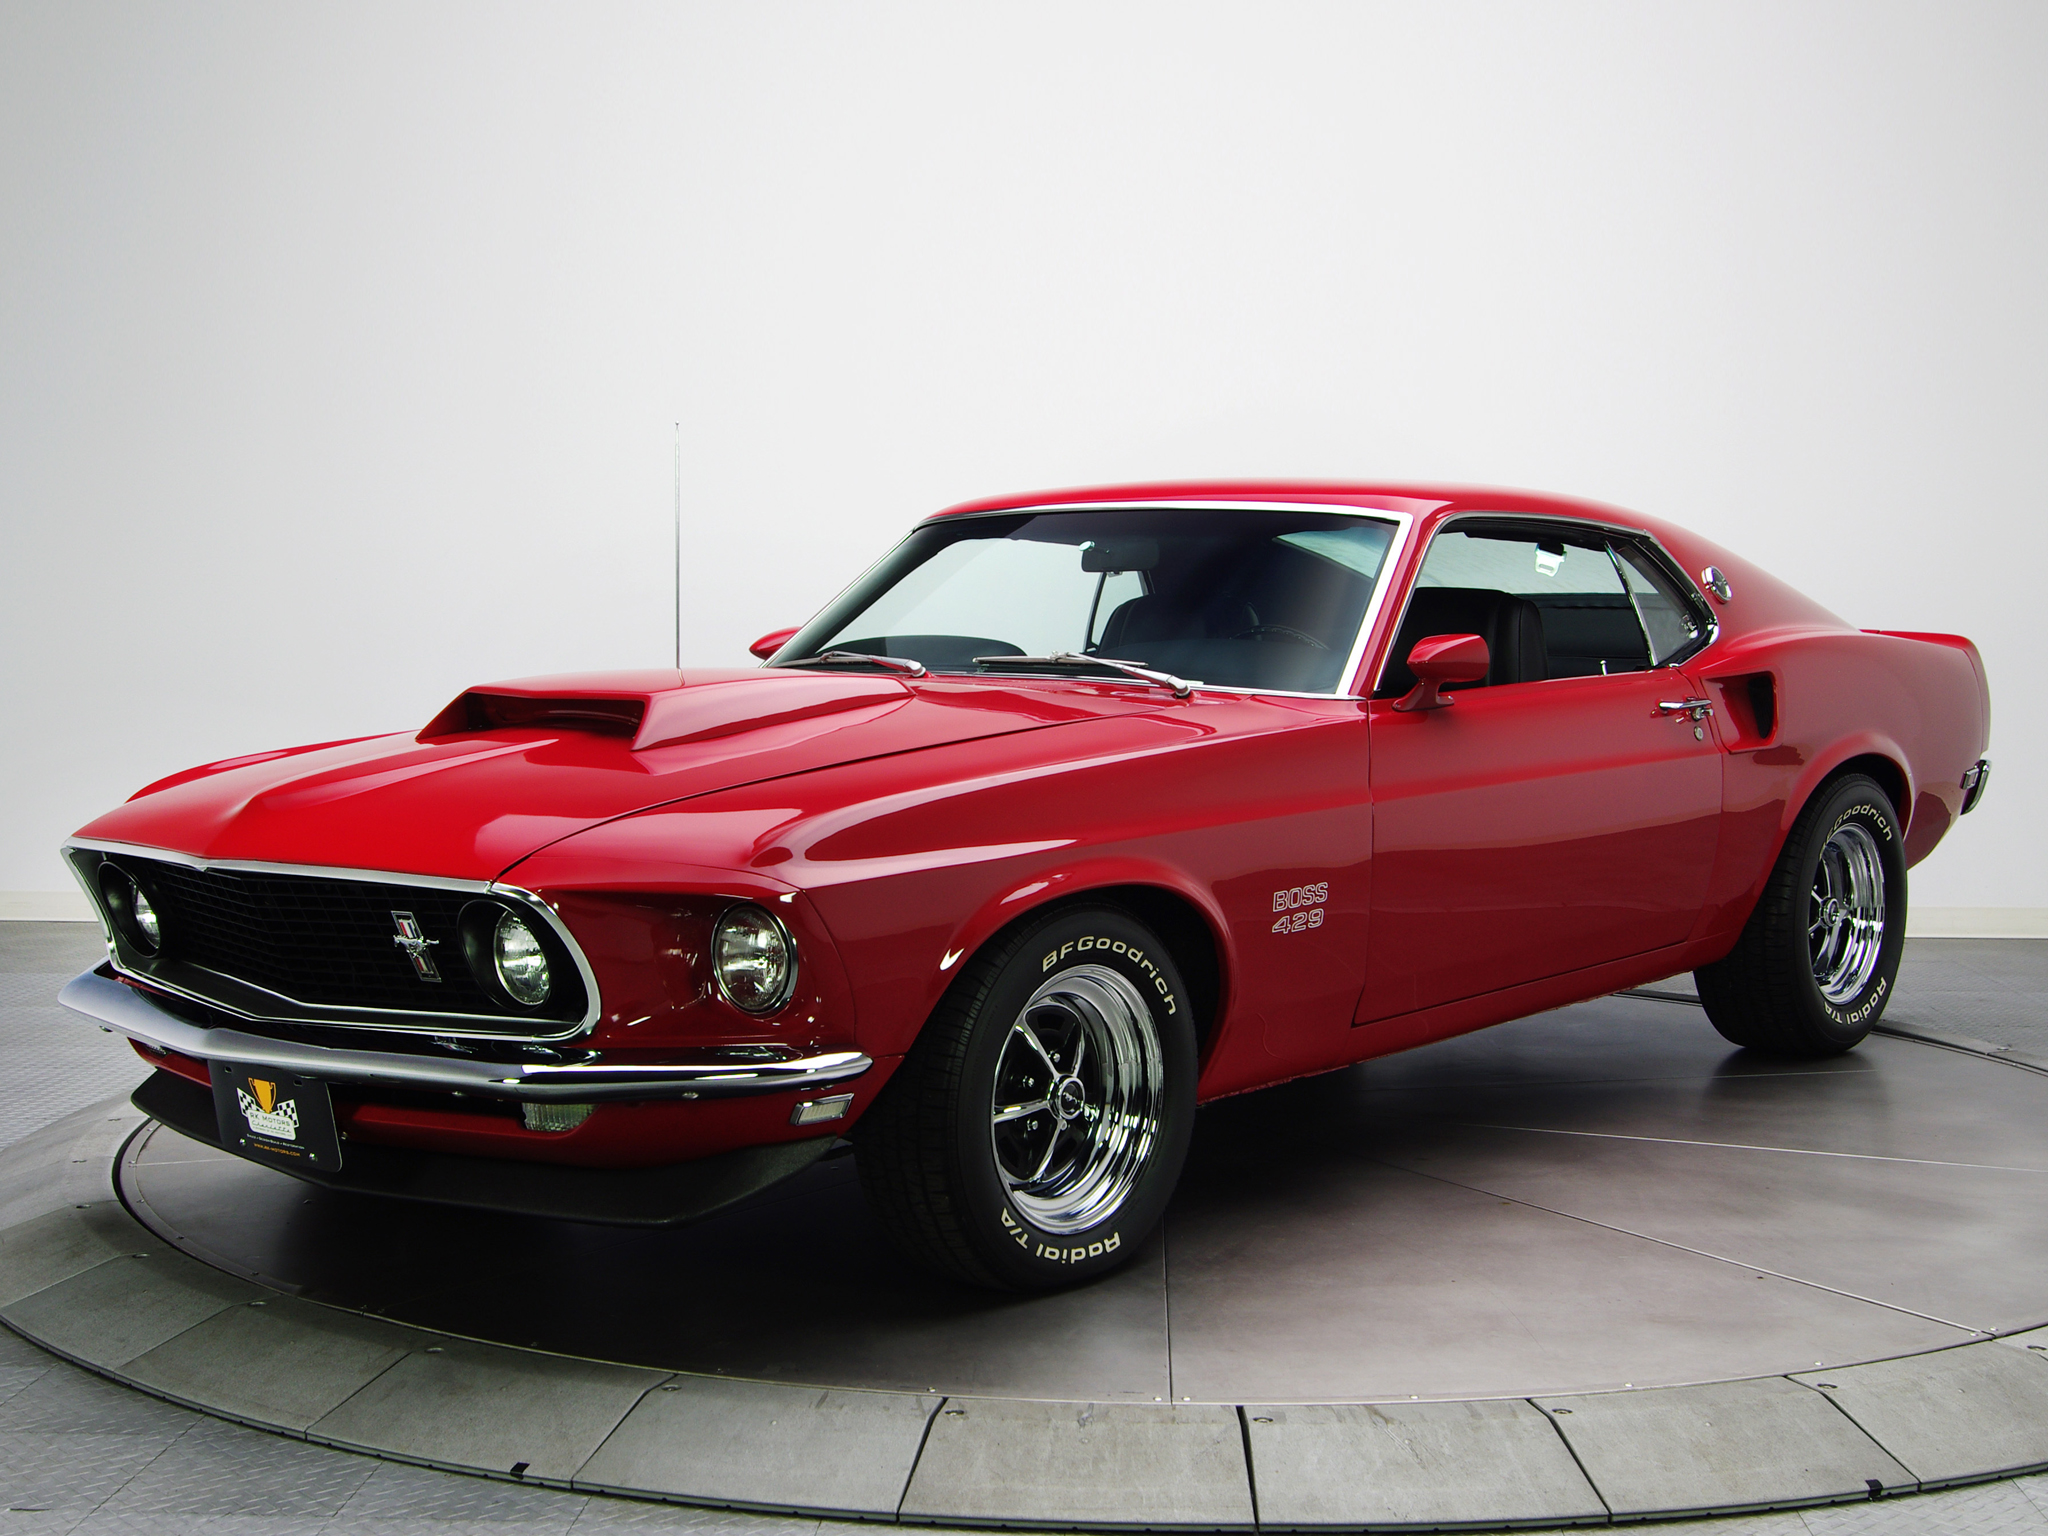 Ford Mustang Boss 302 - image #65